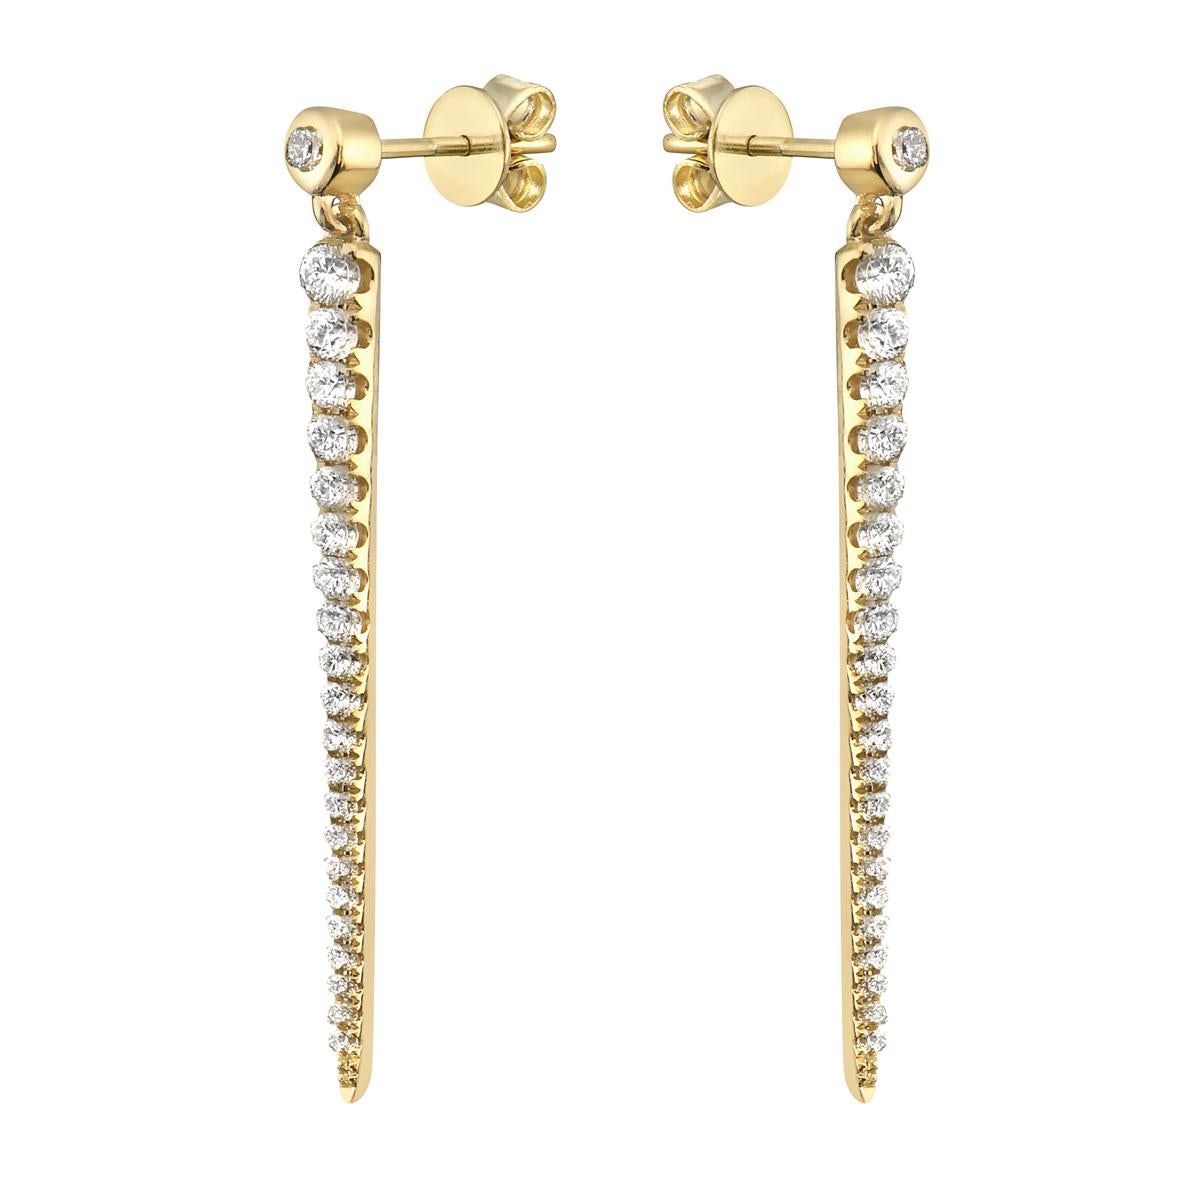 With these exquisite yellow gold dangle diamond earrings, style and glamour are in the spotlight. These 14 karat yellow gold earrings are made from 2.2 grams of gold and is covered in 44 round SI1-SI2, GH color diamonds totaling 0.56ct.